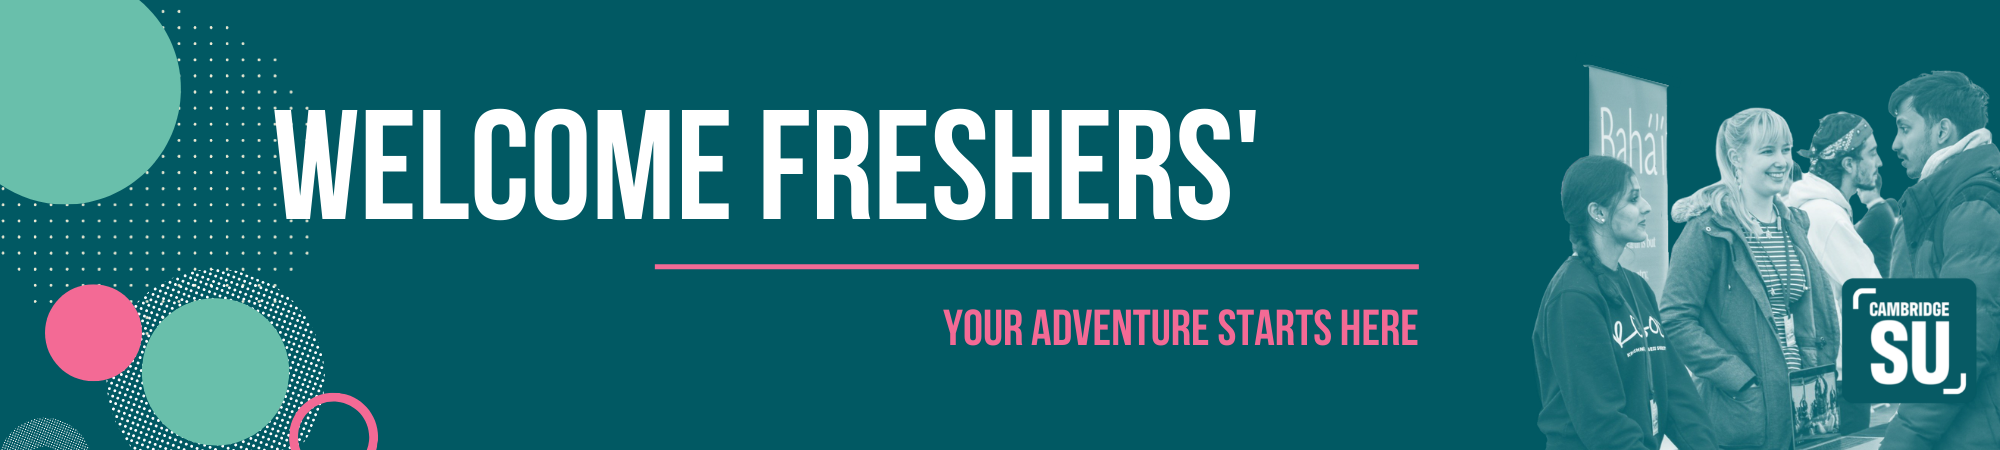 "Welcome Freshers' your adventure starts here" on teal background